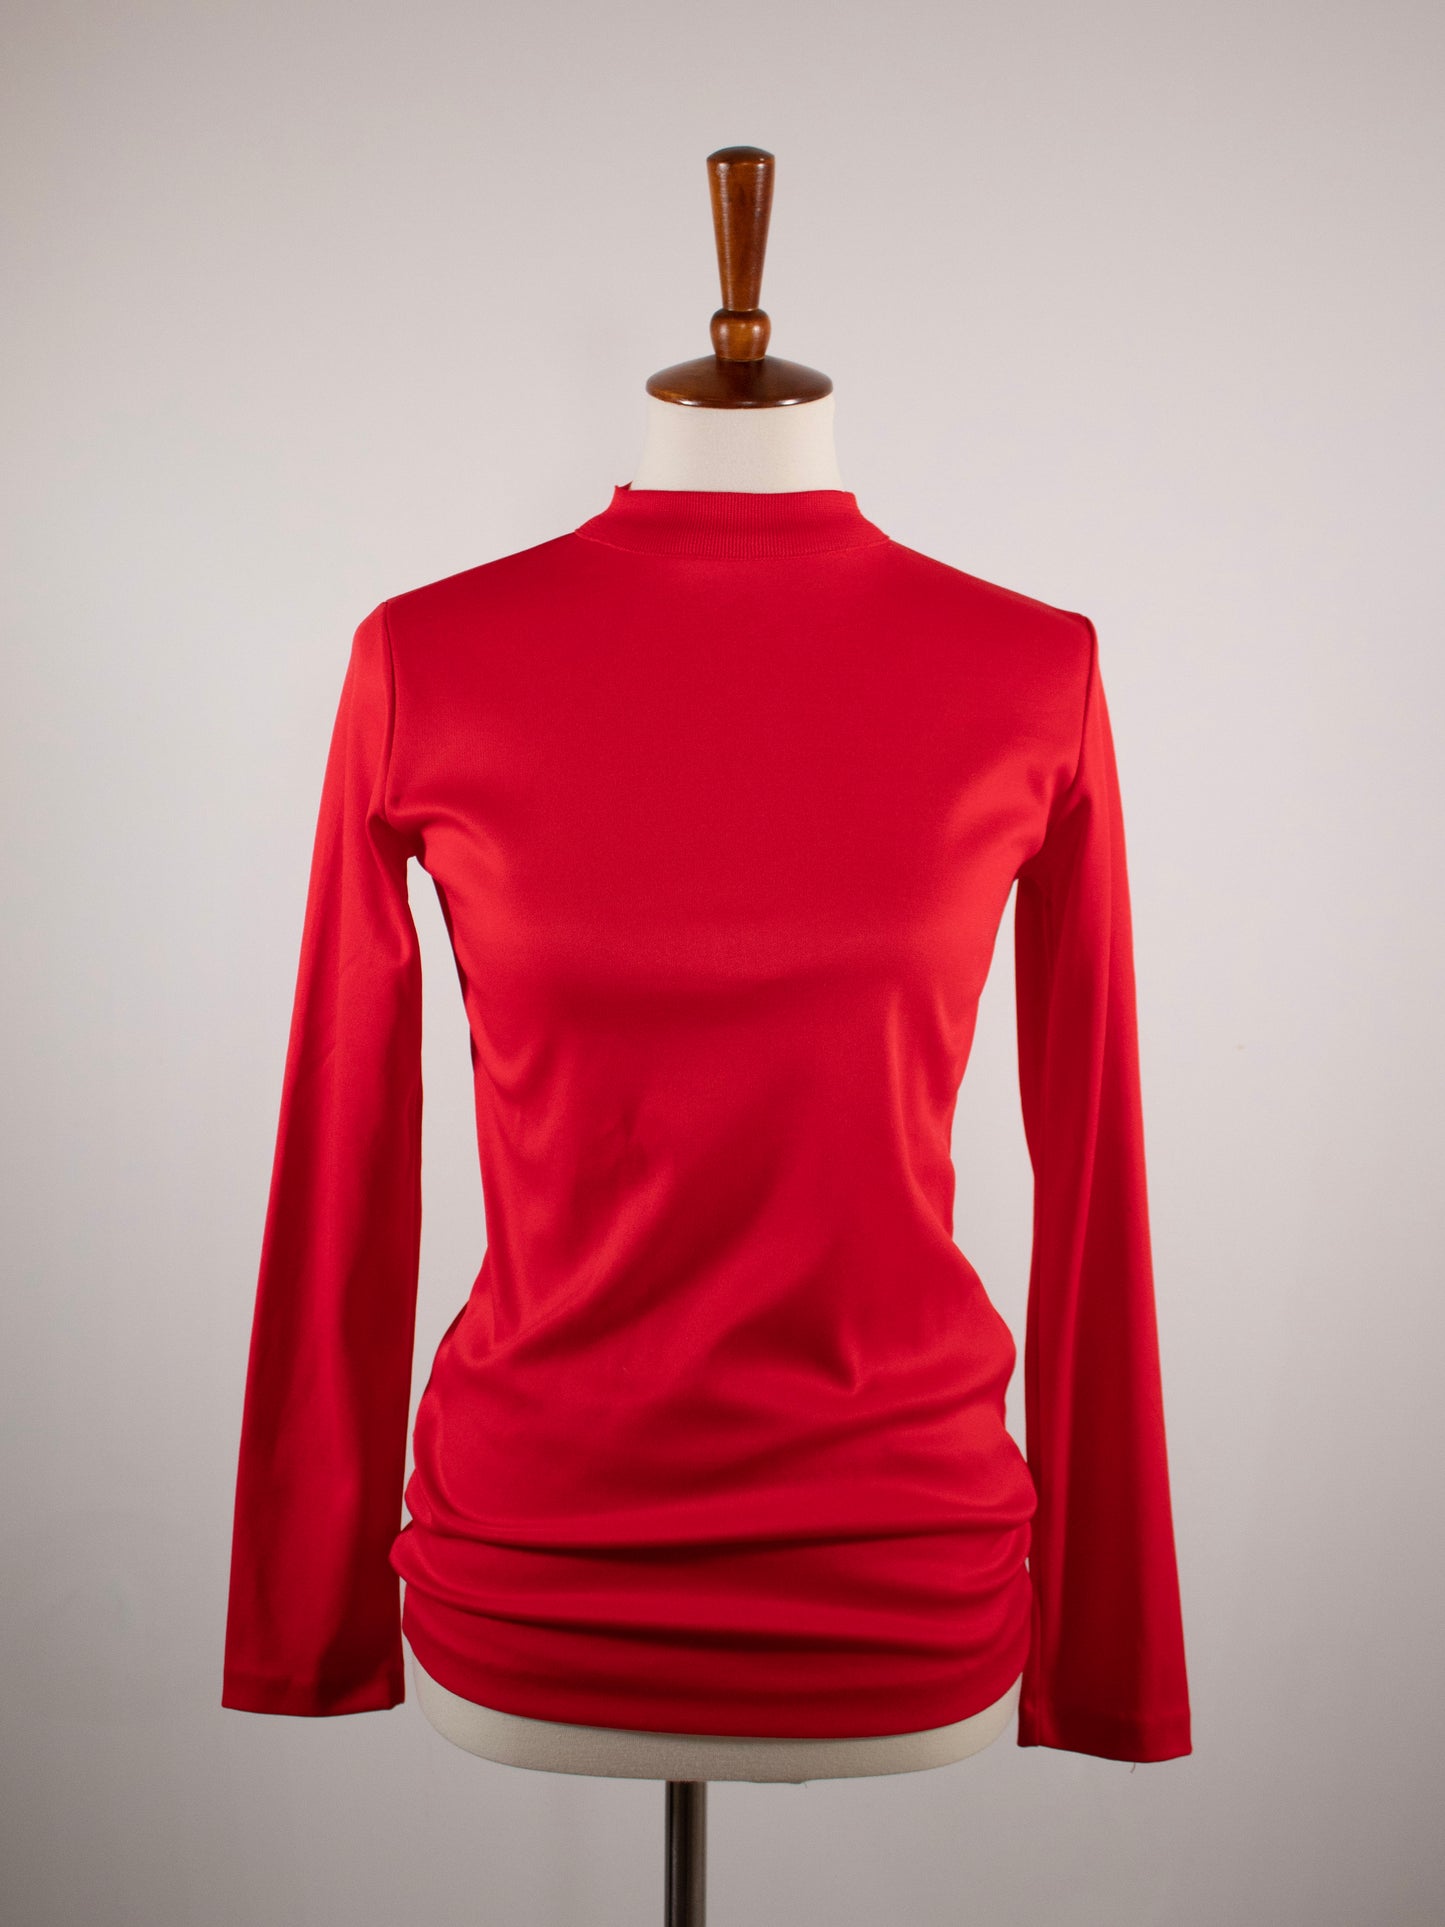 1970s Red Long Sleeve Turtle-Neck